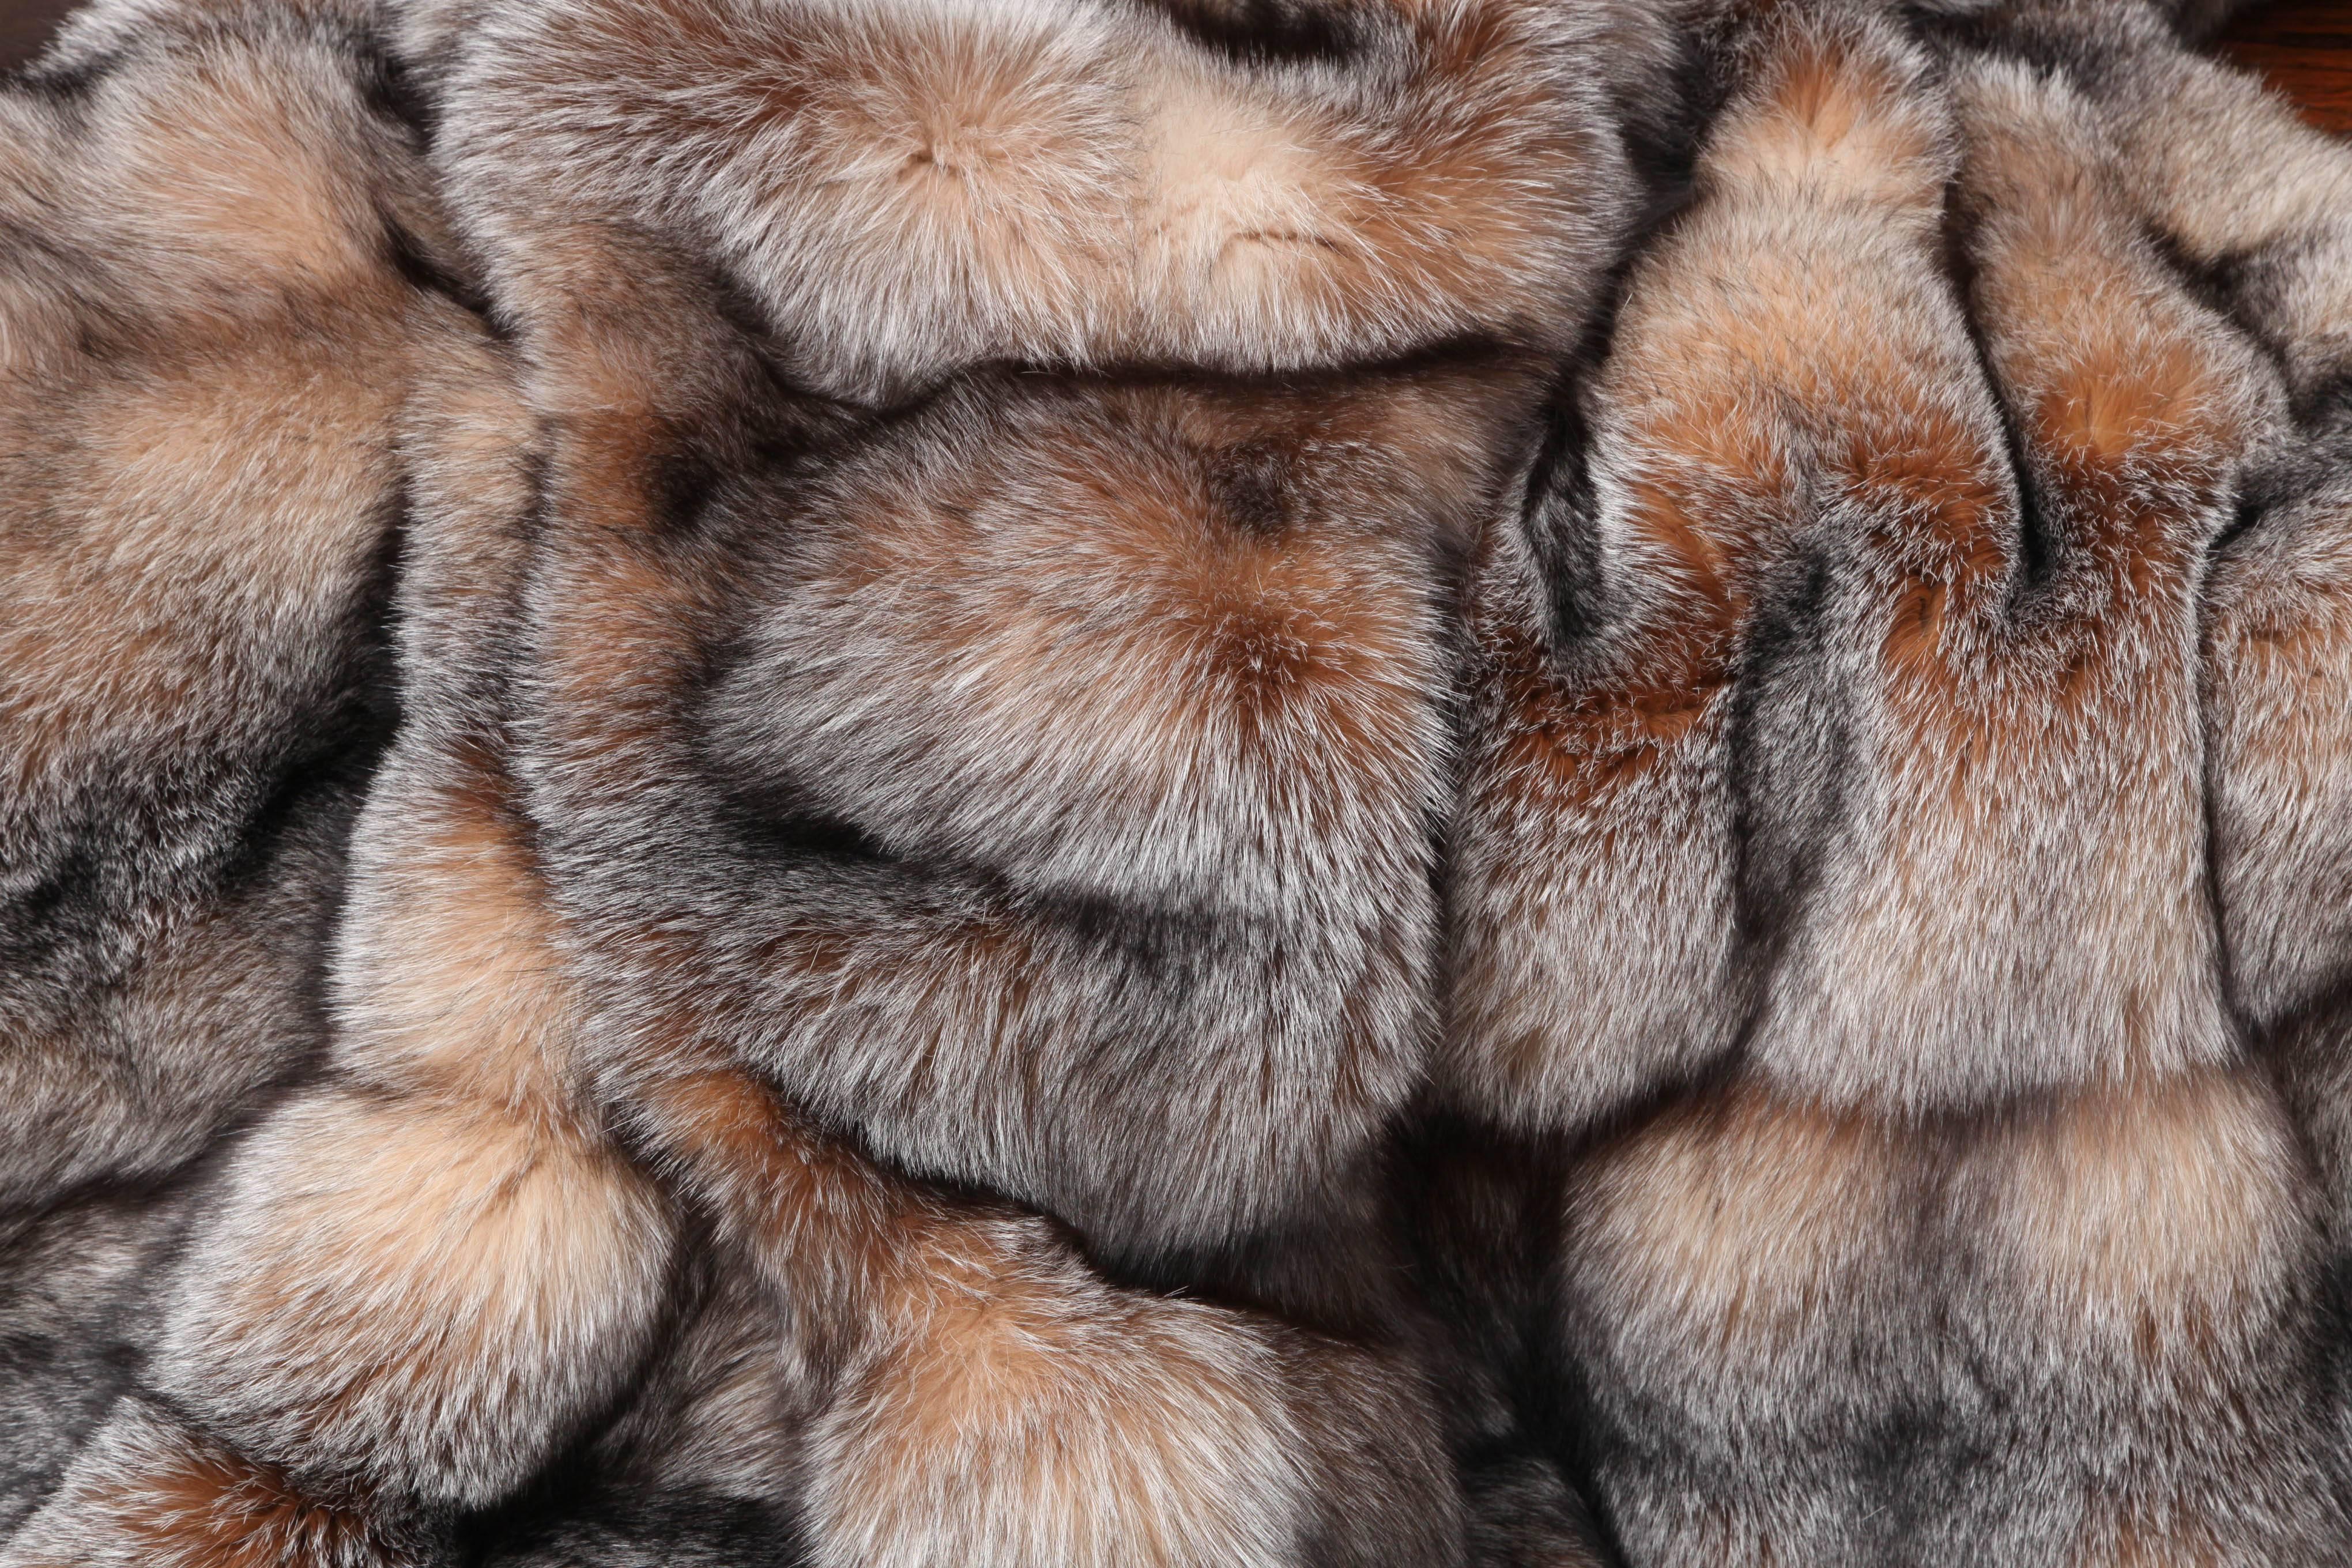 The most beautiful crystal fox throw. Very decorative fur throw for your bedroom or cascading down of your sofa.